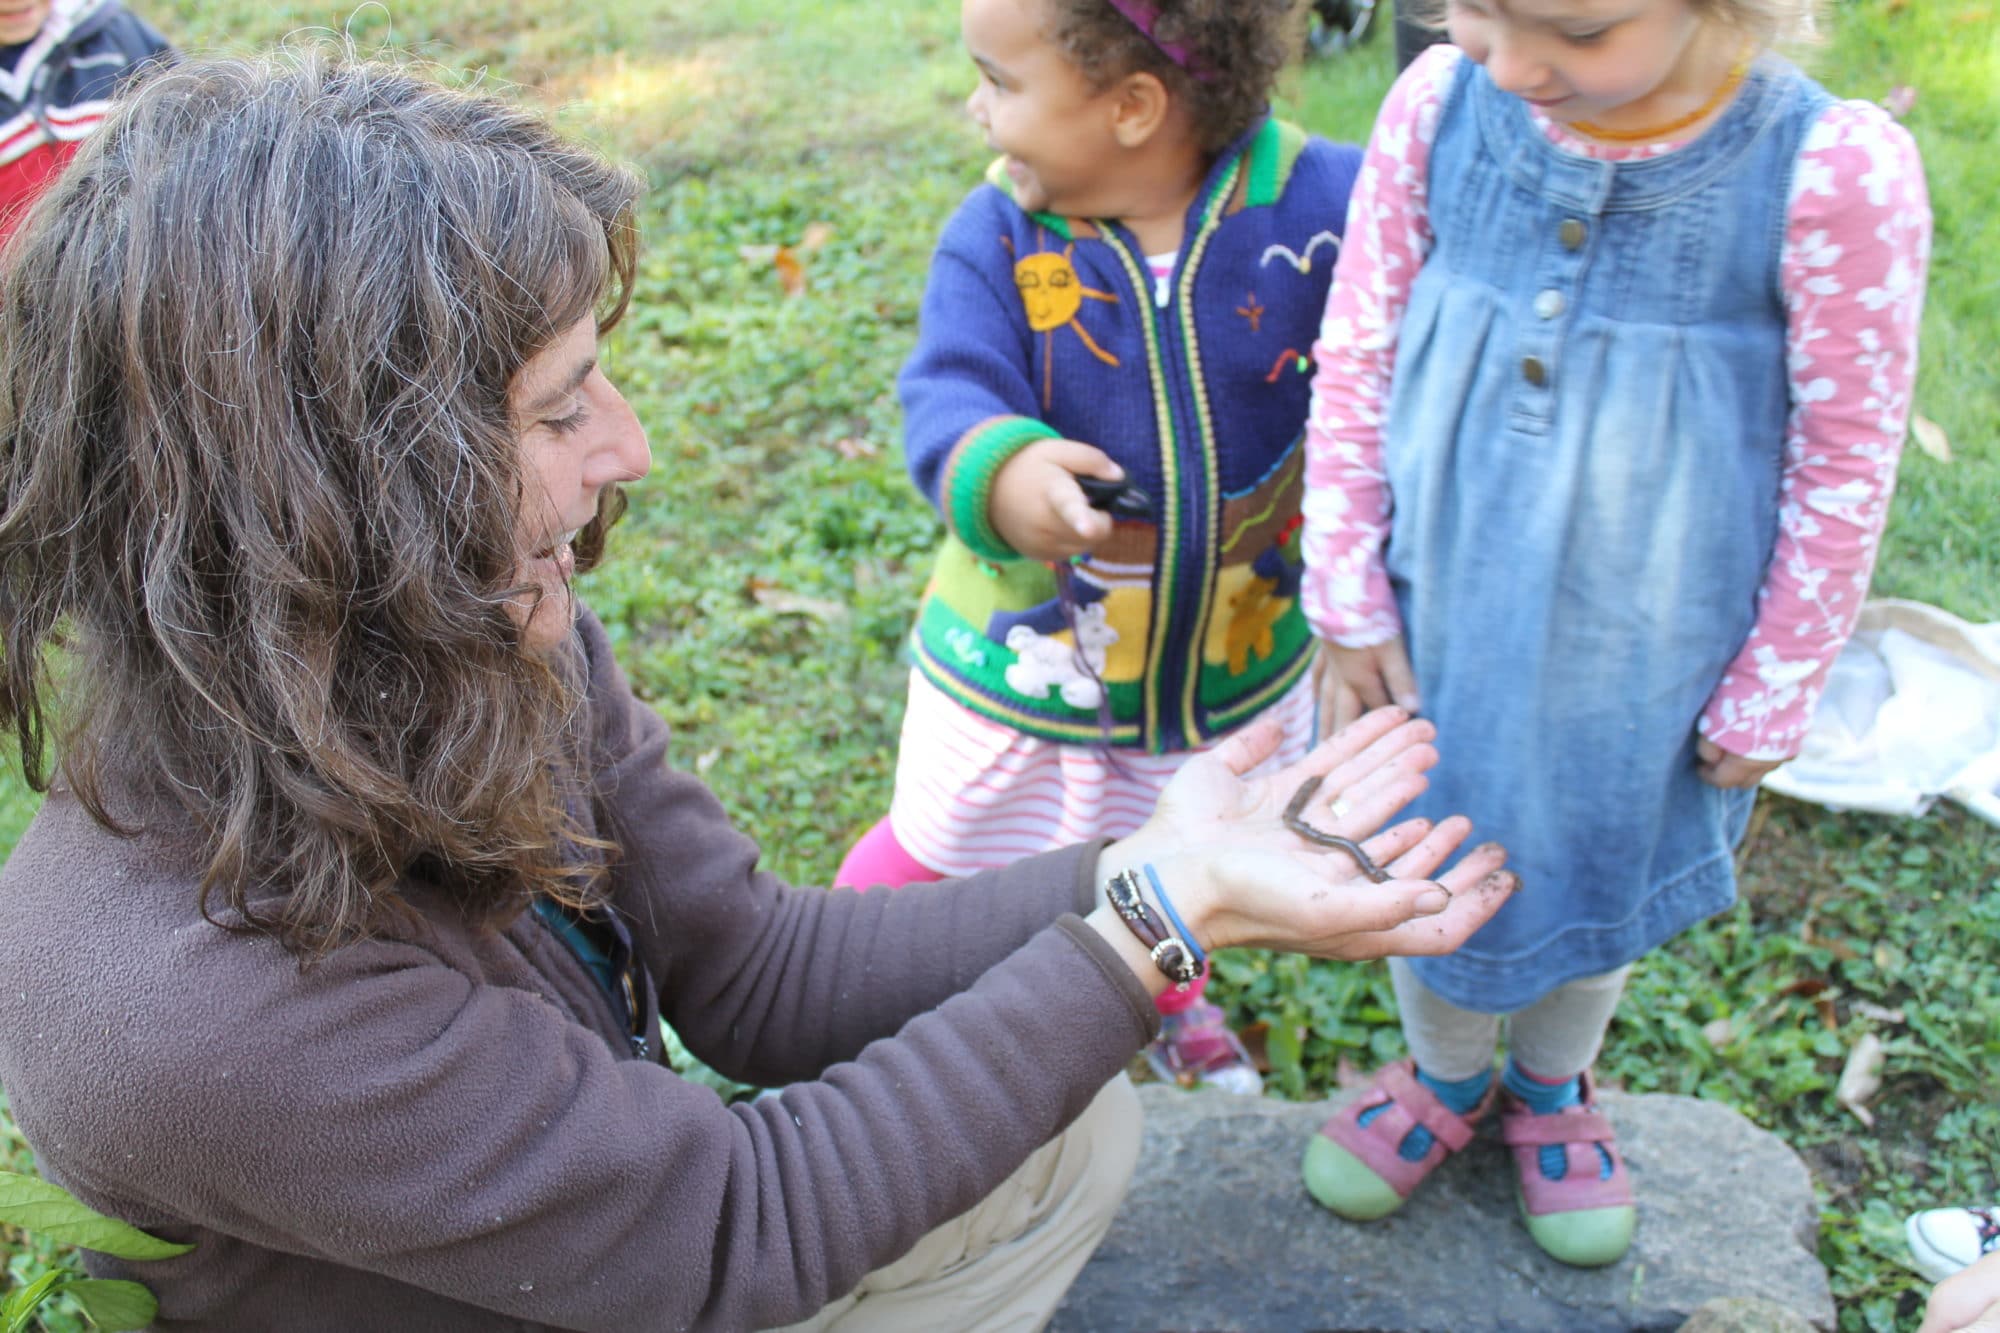 Harris Center naturalist Susie Spikol leads young children in a hands-on exploration of soil organisms.